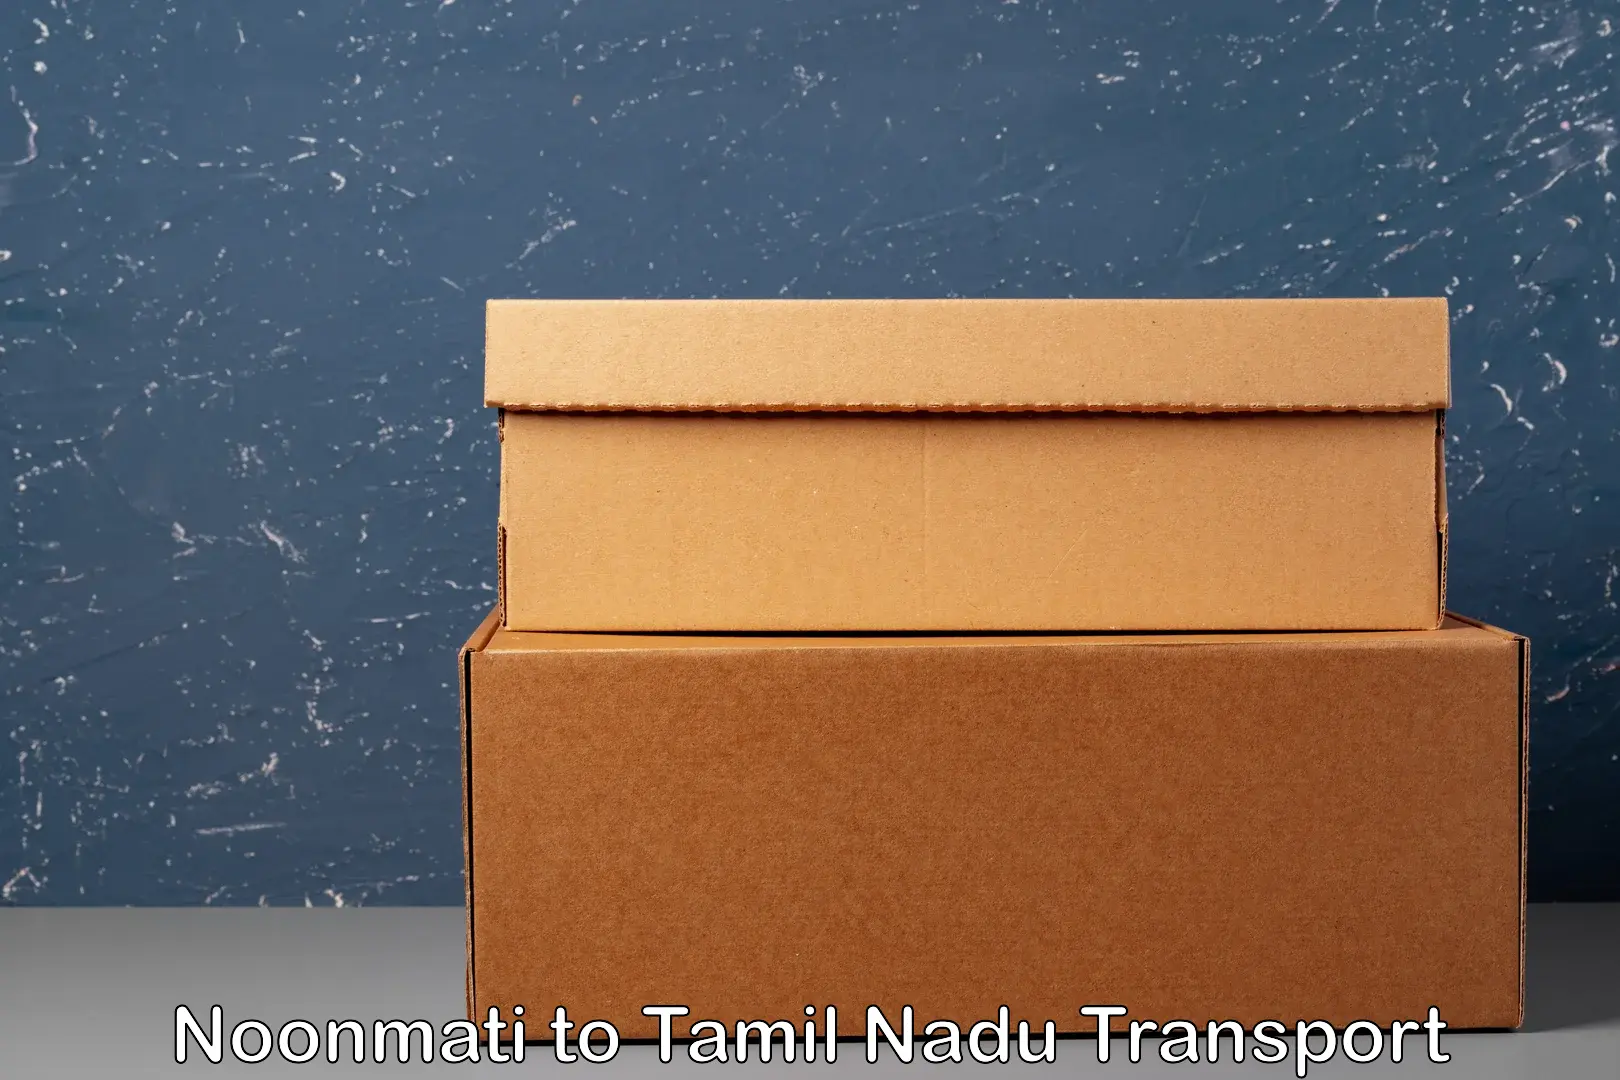 Truck transport companies in India Noonmati to Ranipet